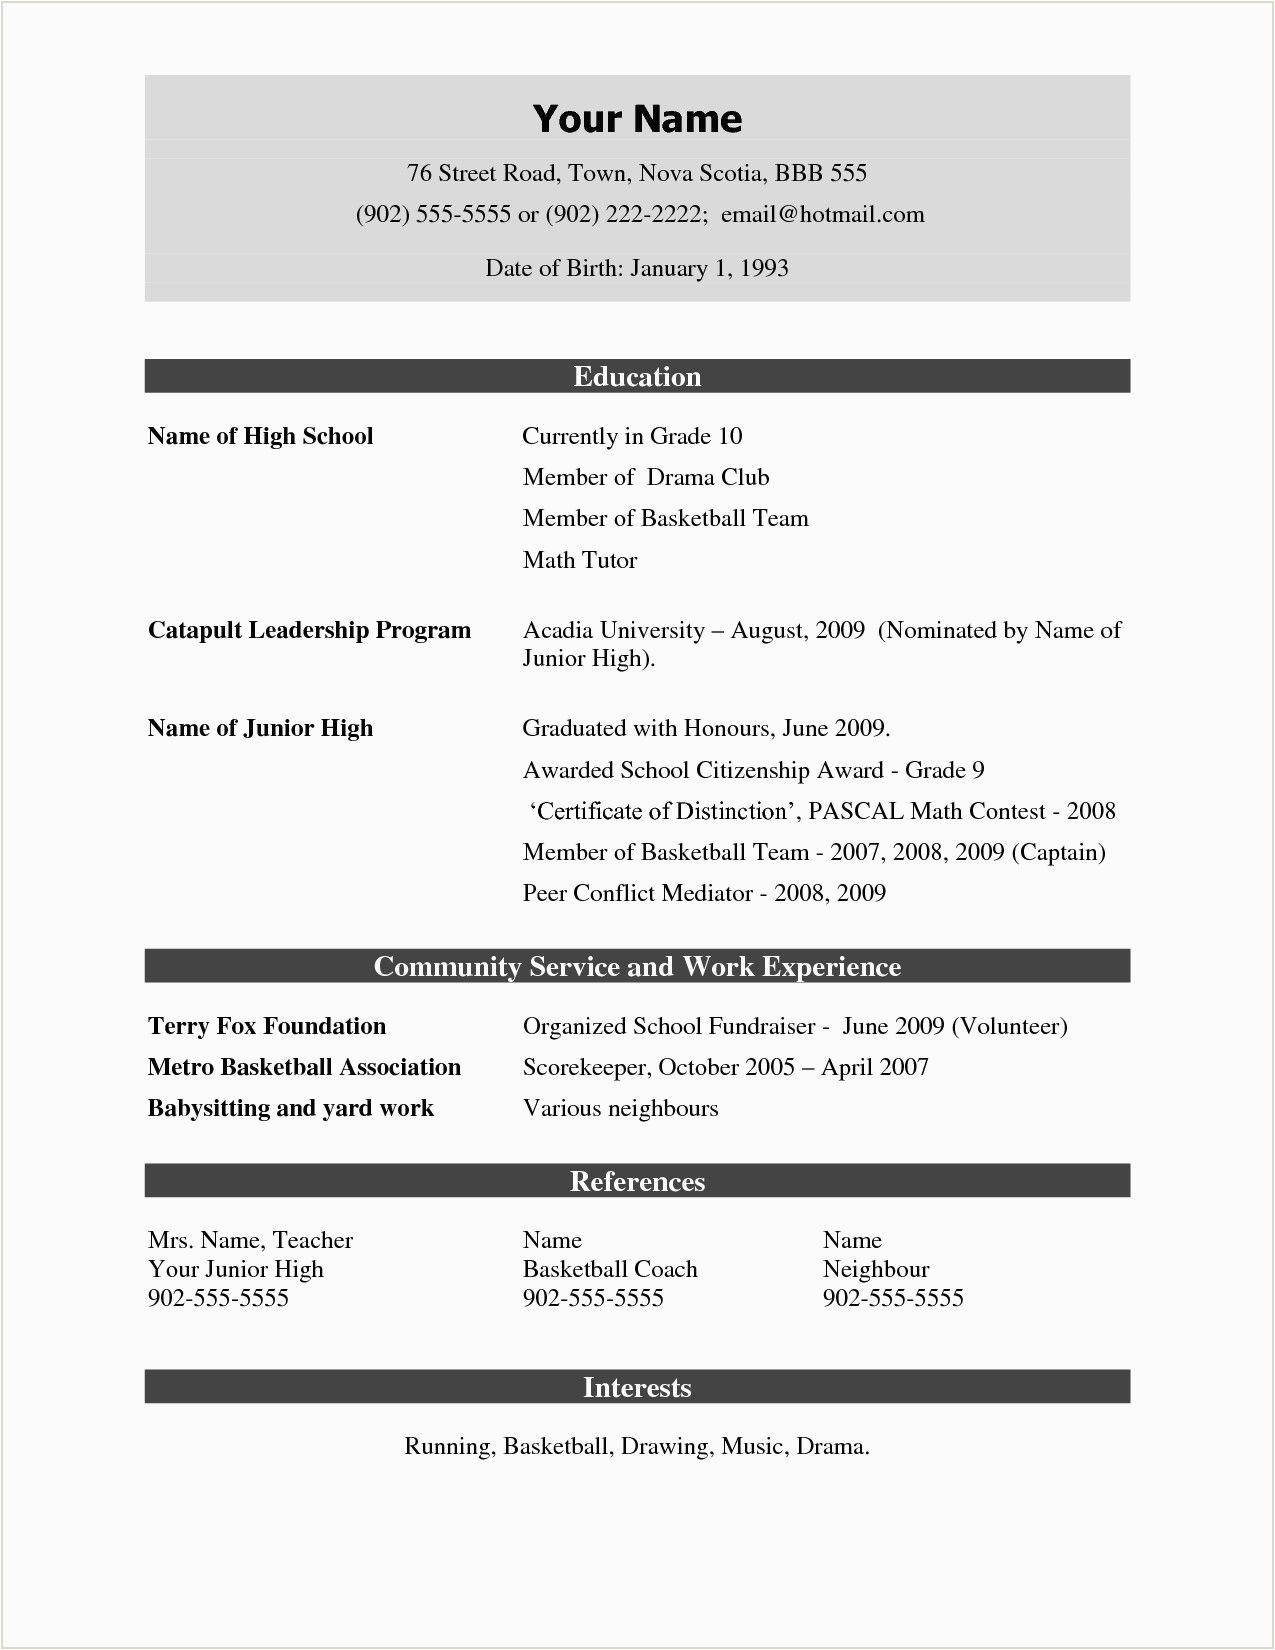 Resume Template for Freshers with Photo Fresher Teacher Resume format Download Best Resume Examples